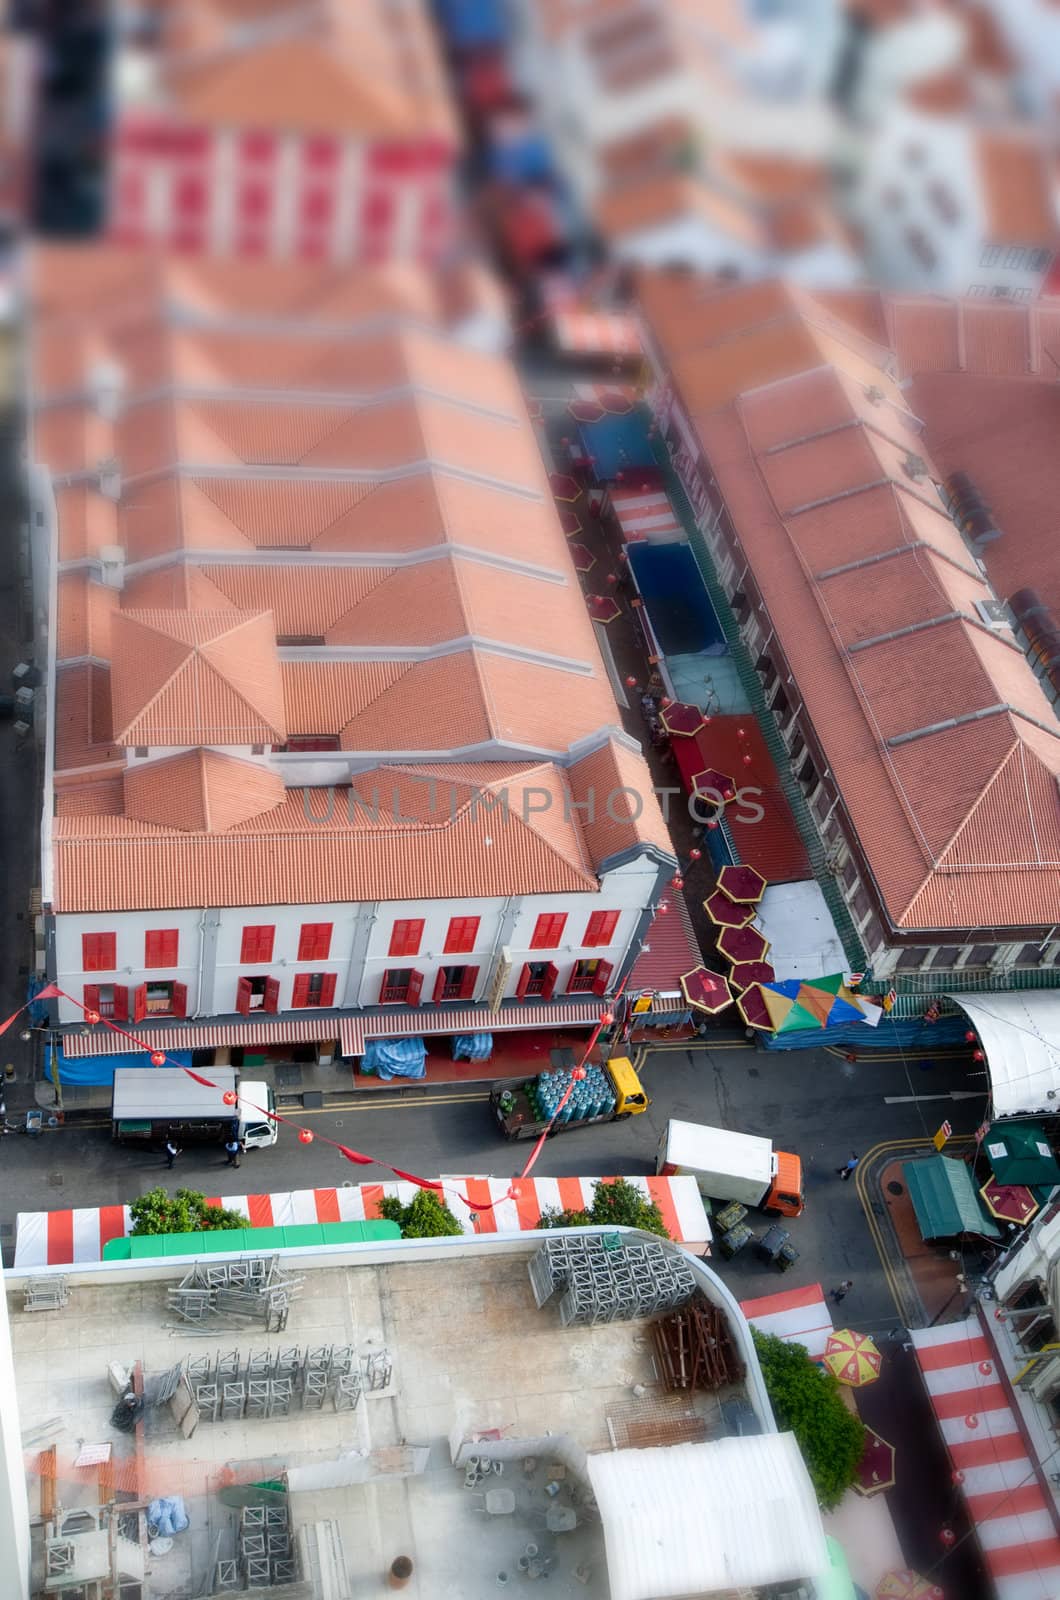 A detail of Chinatown with a til shift lens